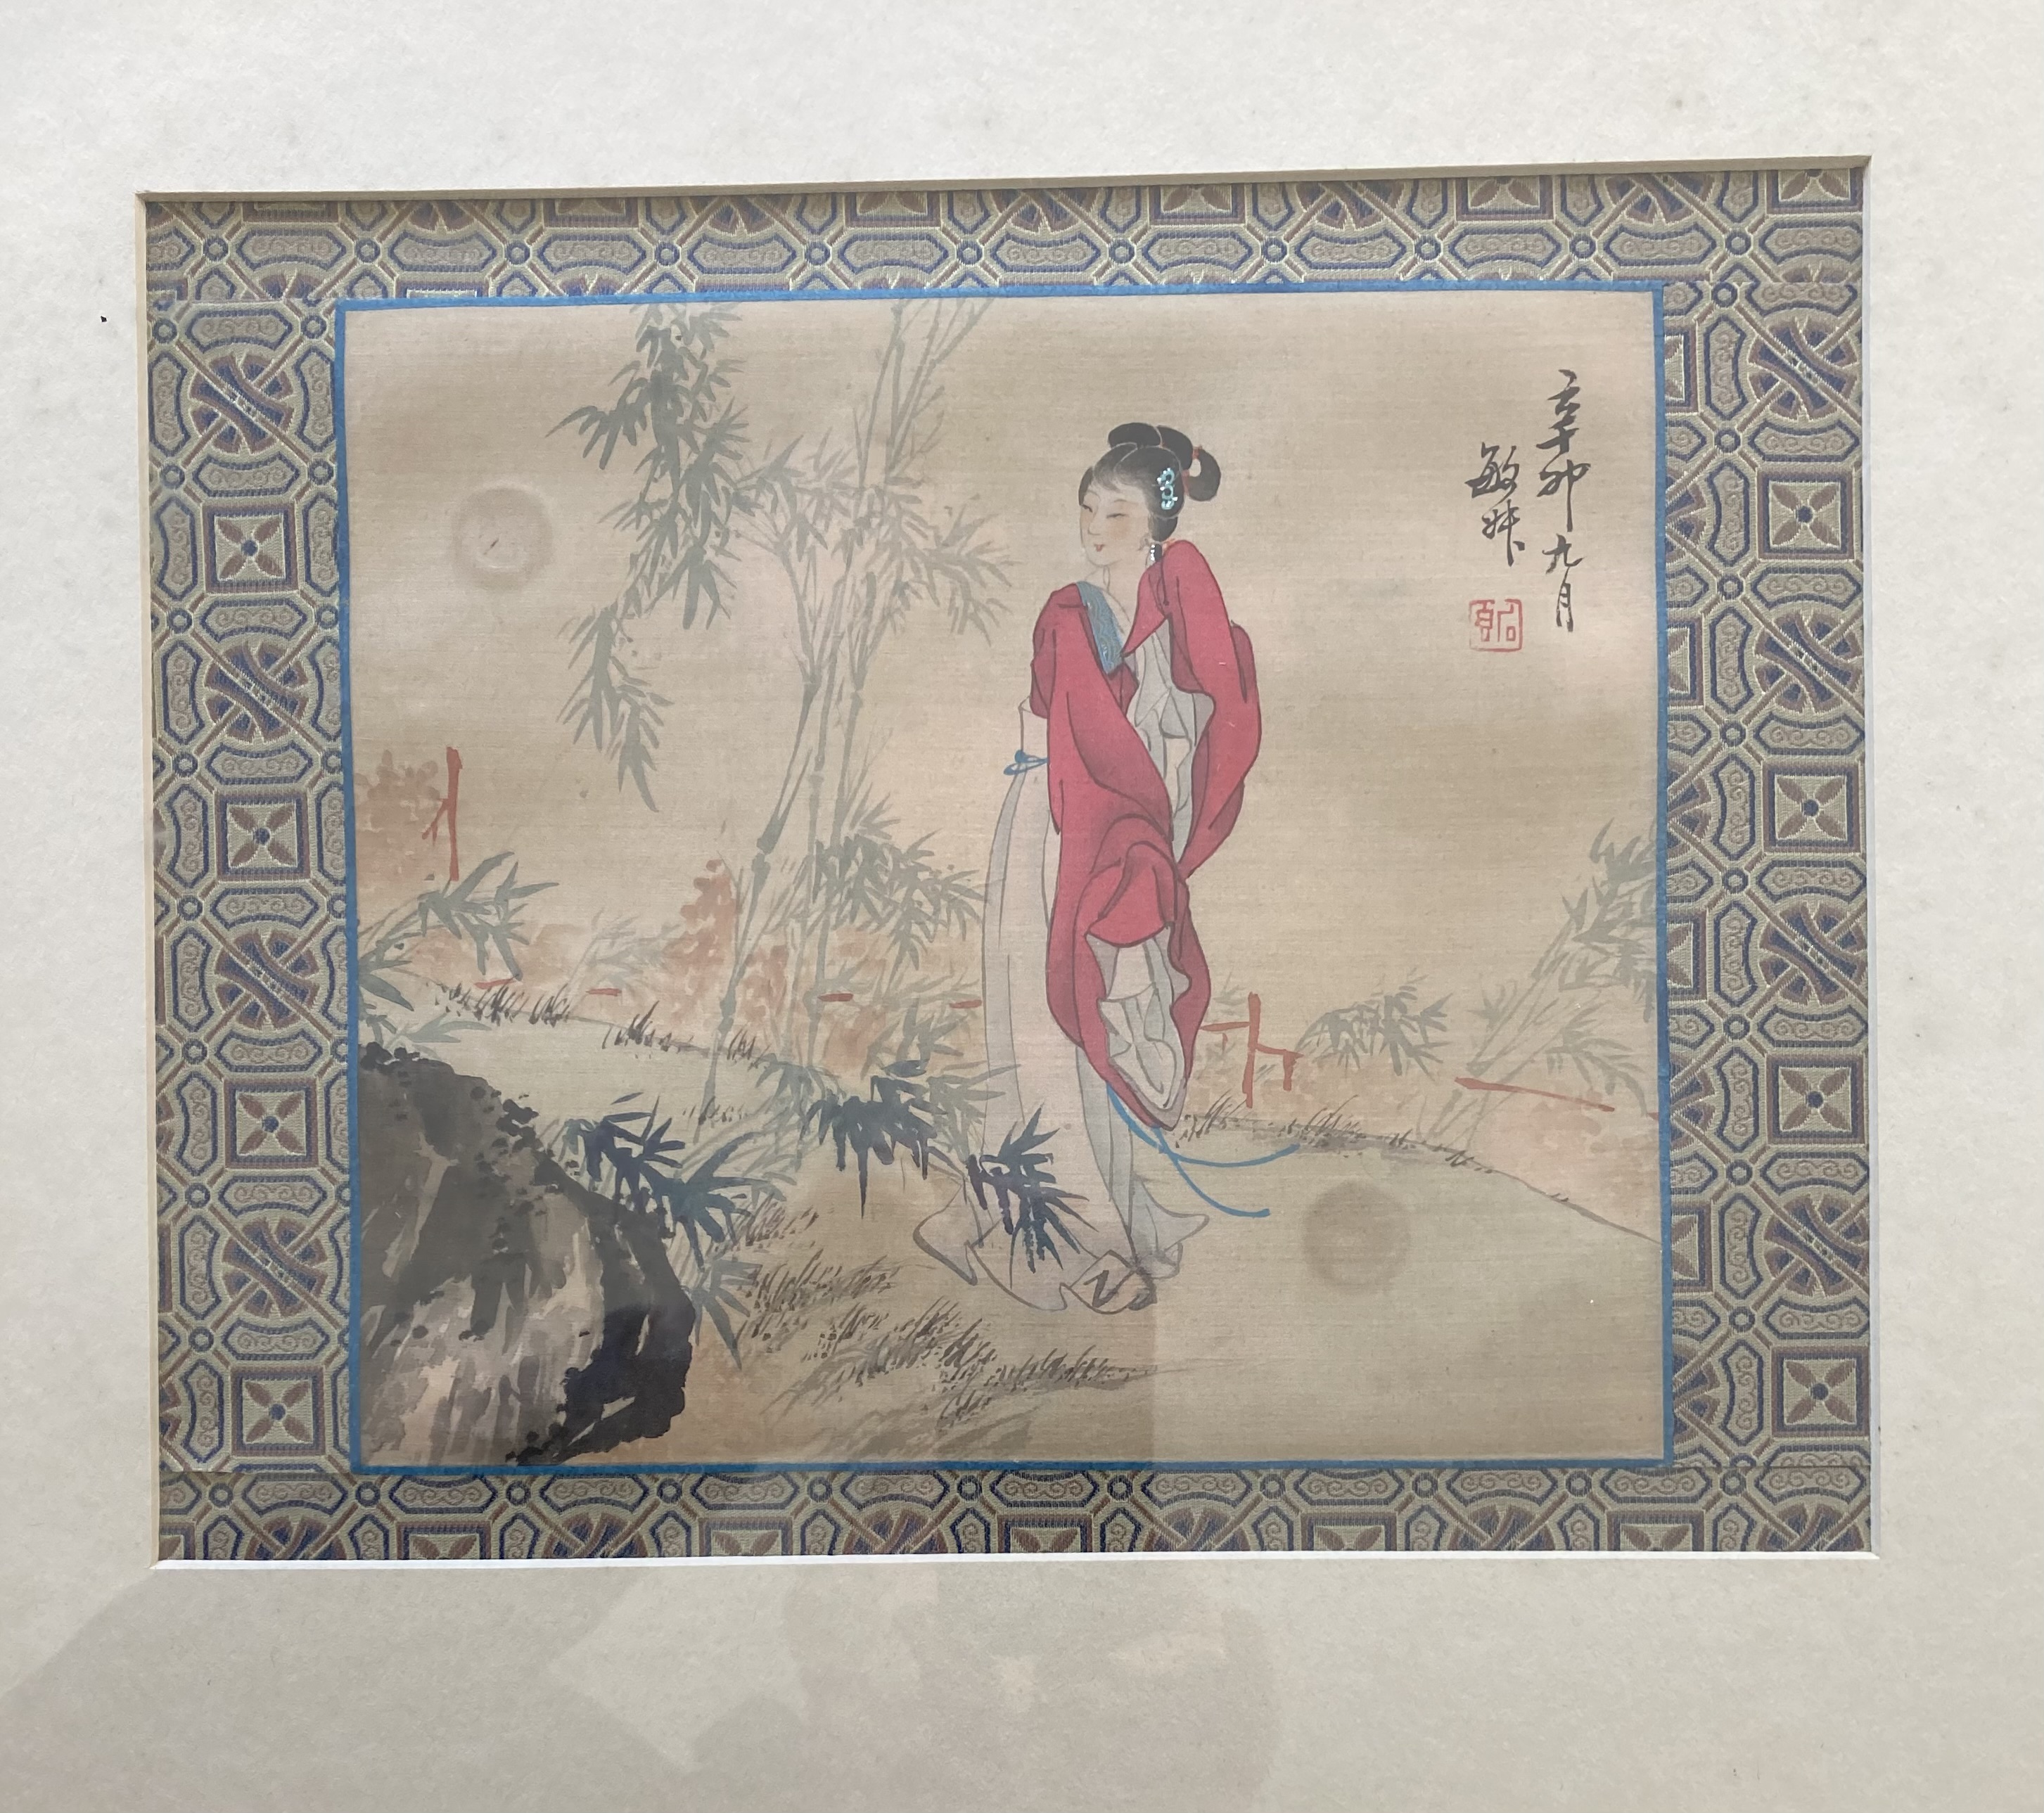 Chinese silk print of lady in red costume with inscription - Image 2 of 2